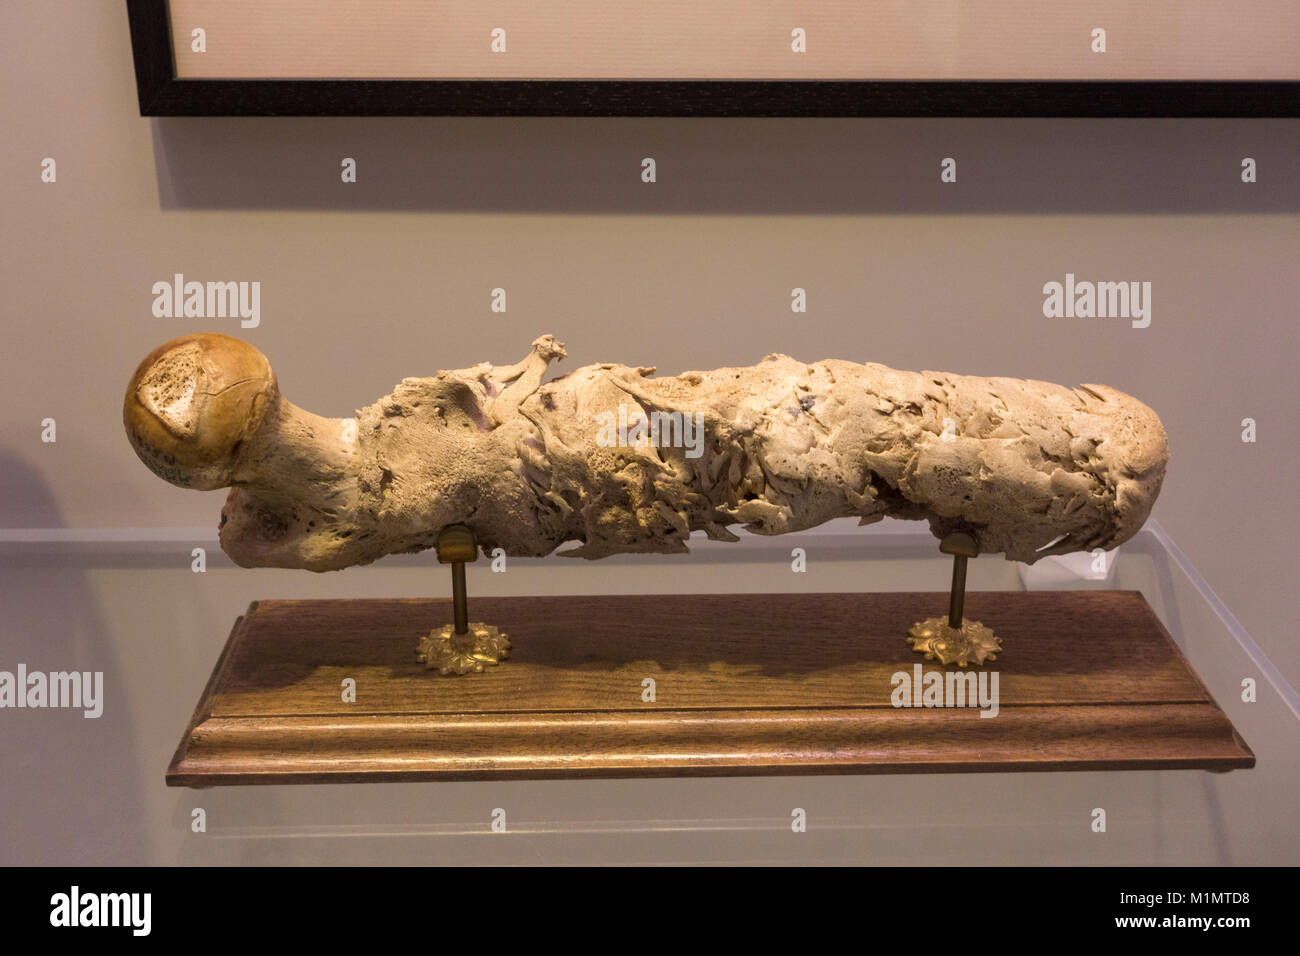 A human femur with gunshot wound (chronic osteomyelitis) on display in the National Museum of Health and Medicine, Silver Spring, MD, USA. Stock Photo